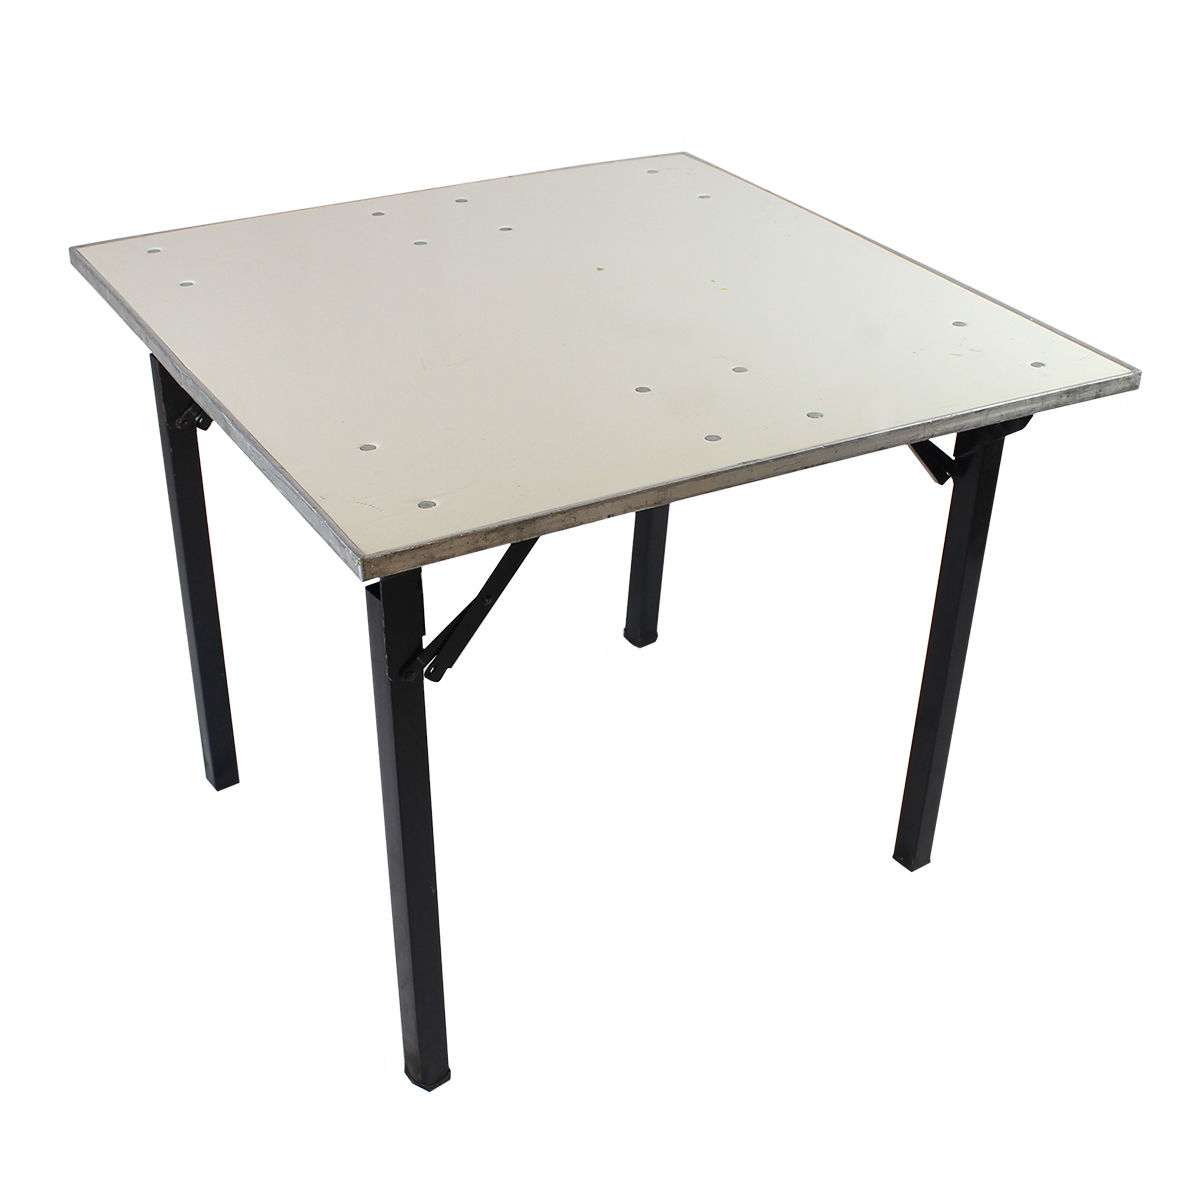 Table 36"x36" White Formica Topped